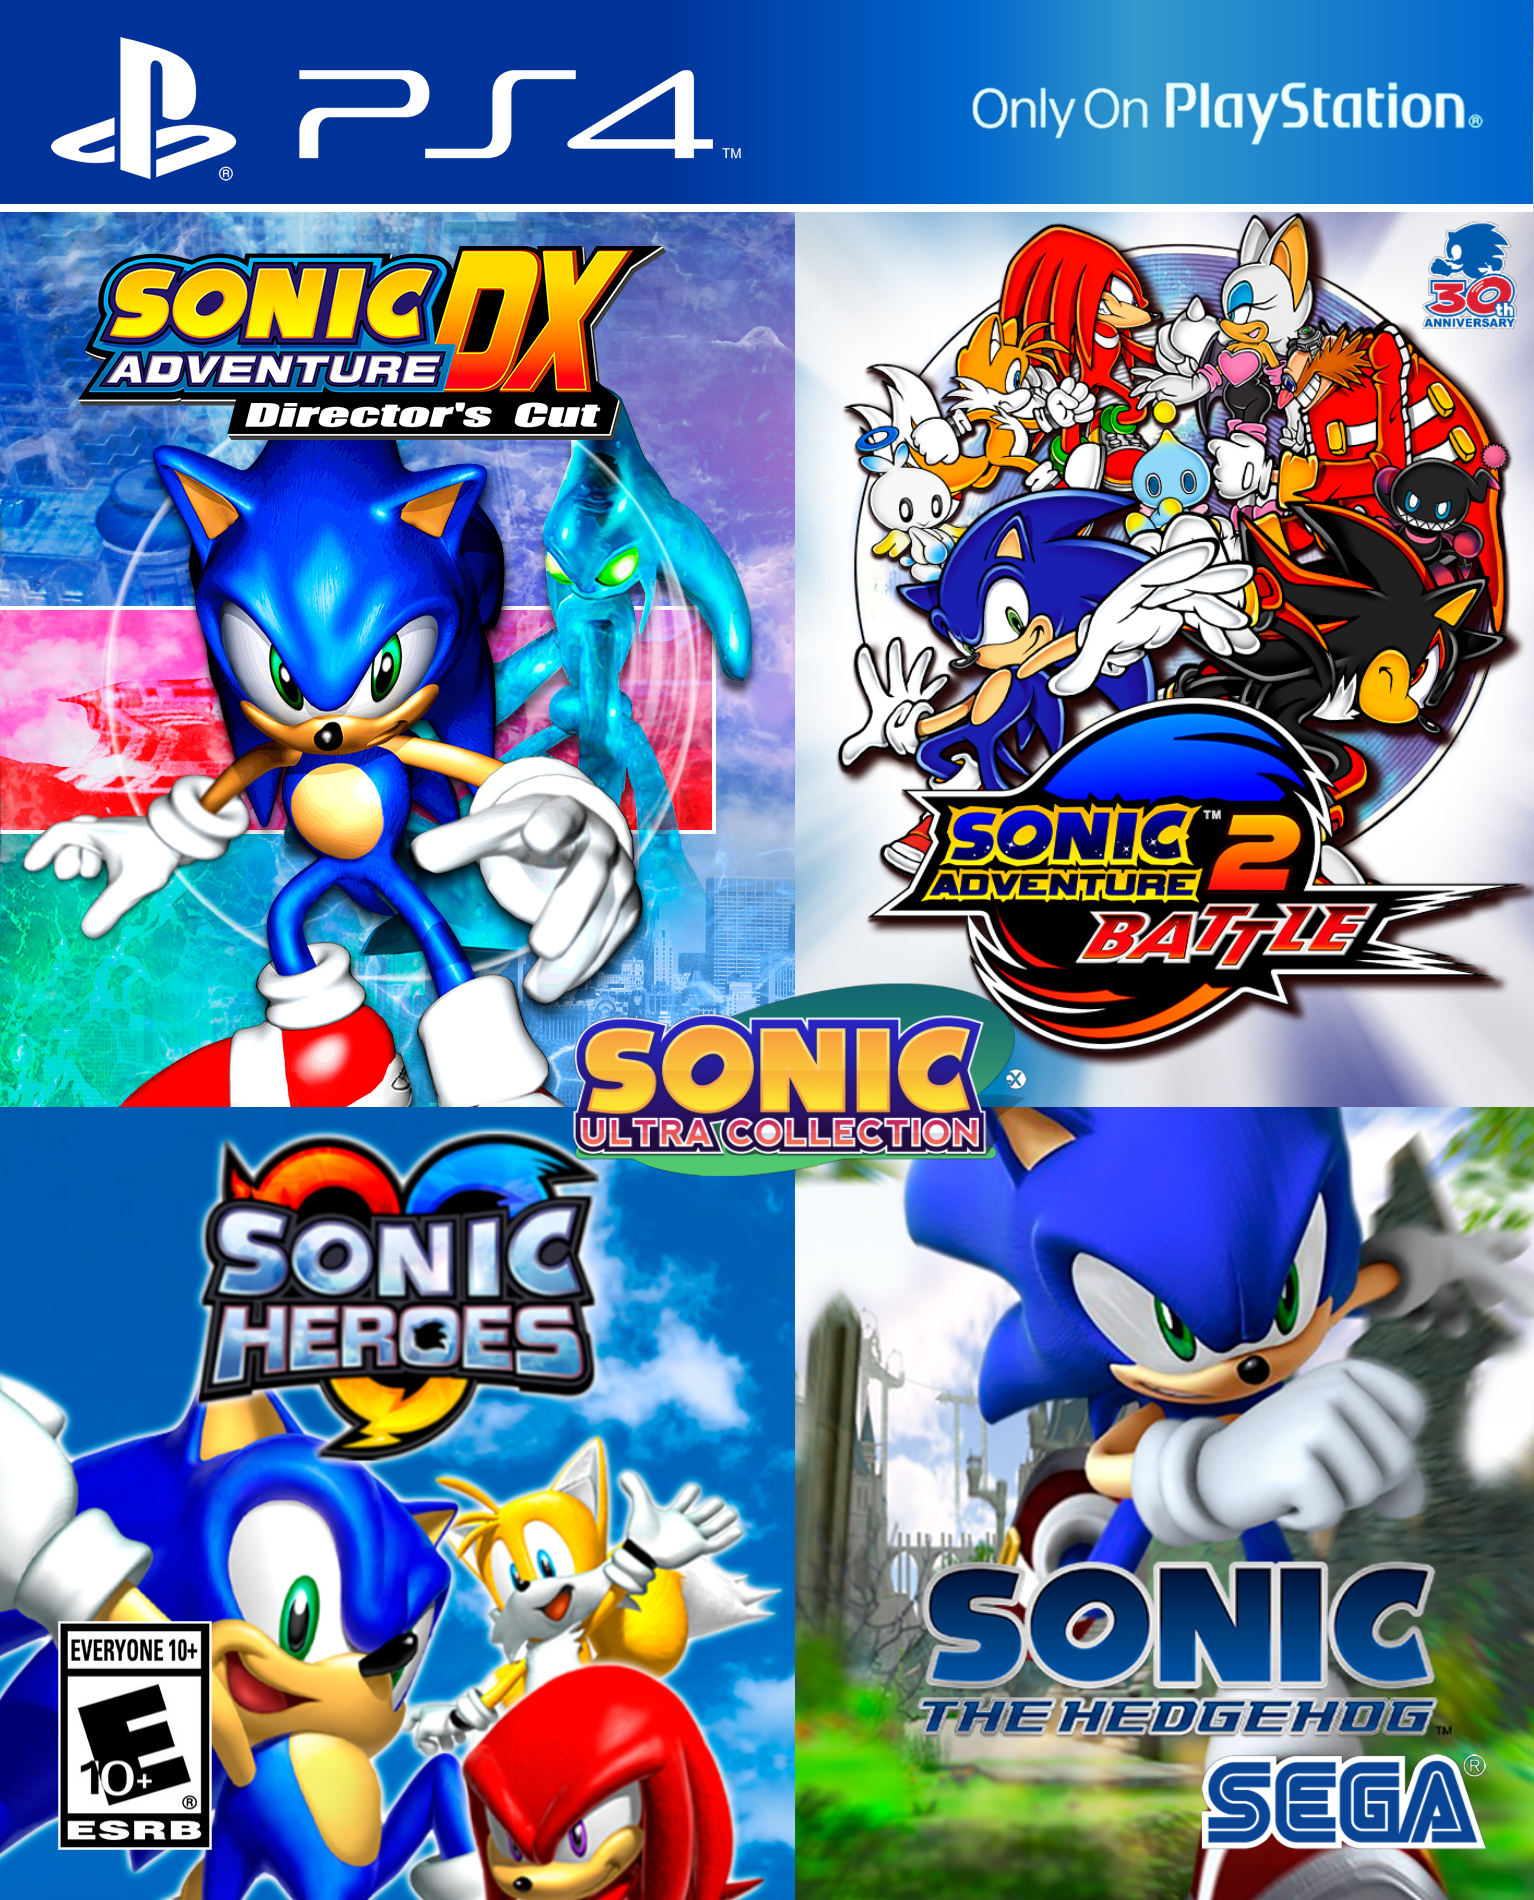 Sonic The Hedgehog 4 PlayStation 3 Box Art Cover by soniciscool